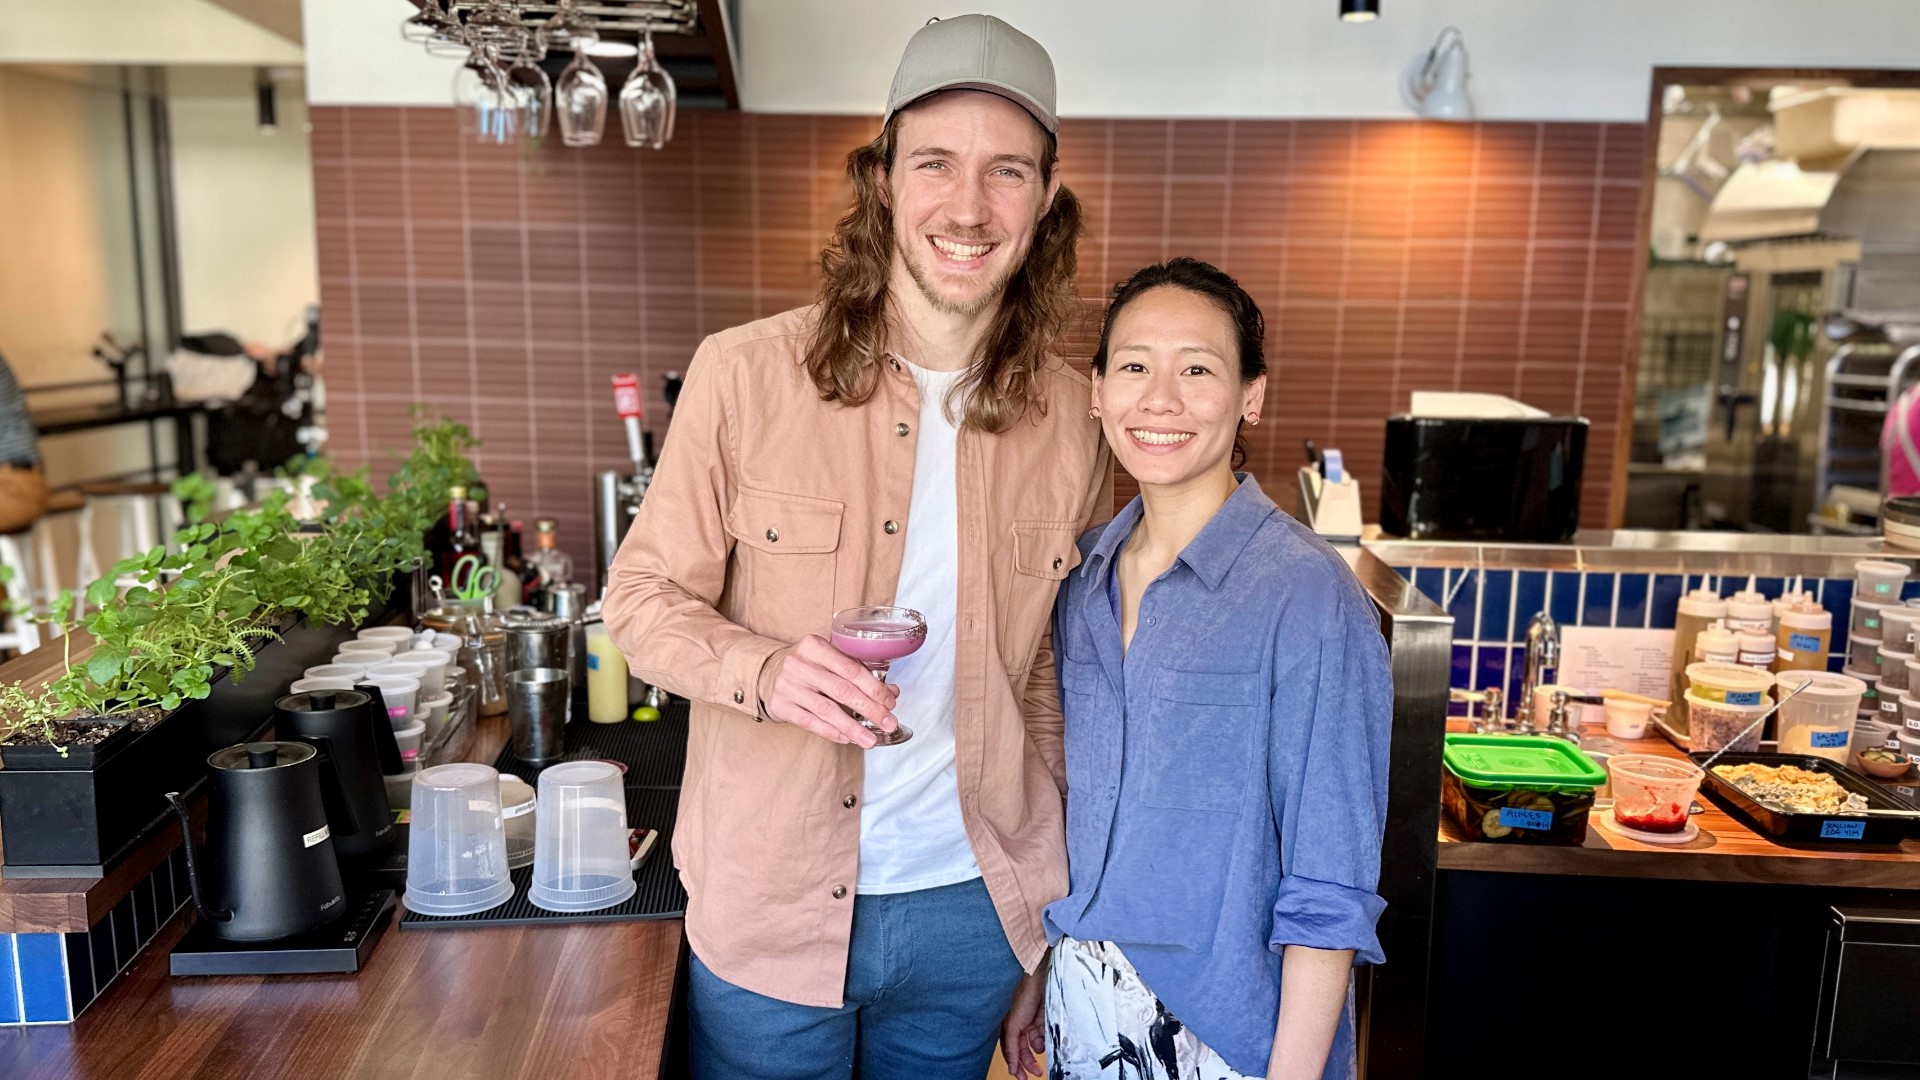 Cardoon is a daytime eatery featuring coffee, zero-proof cocktails and bites inspired by the owners' heritages. #k5evening